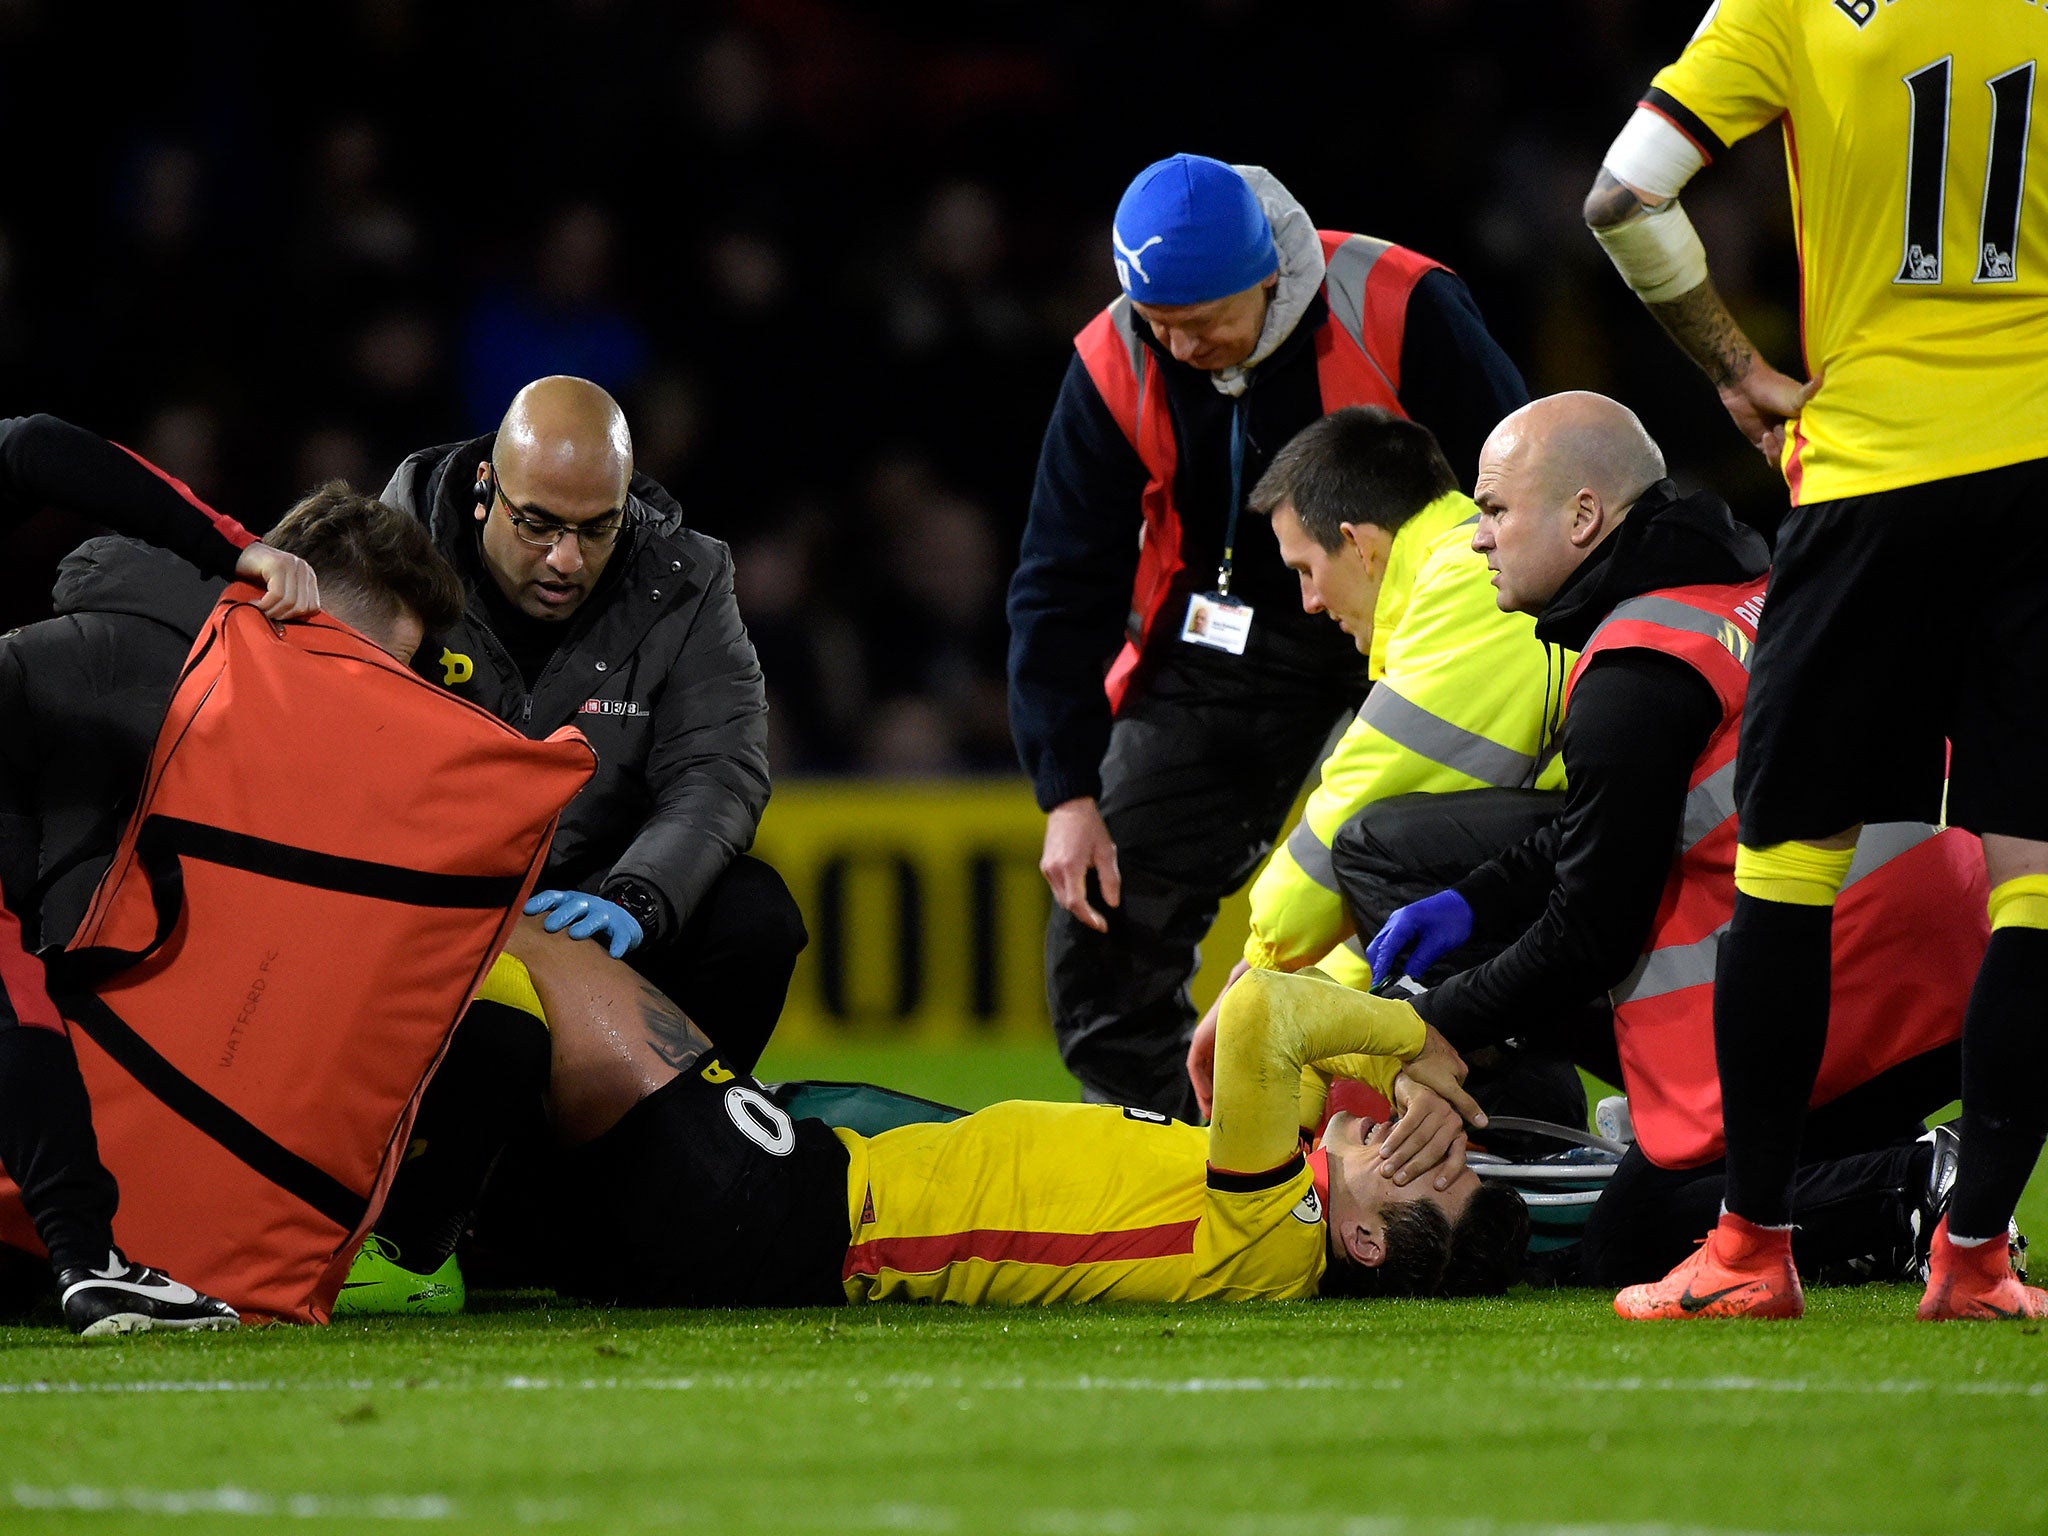 Mauro Zarate's injury will be a cause for concern for Watford fans